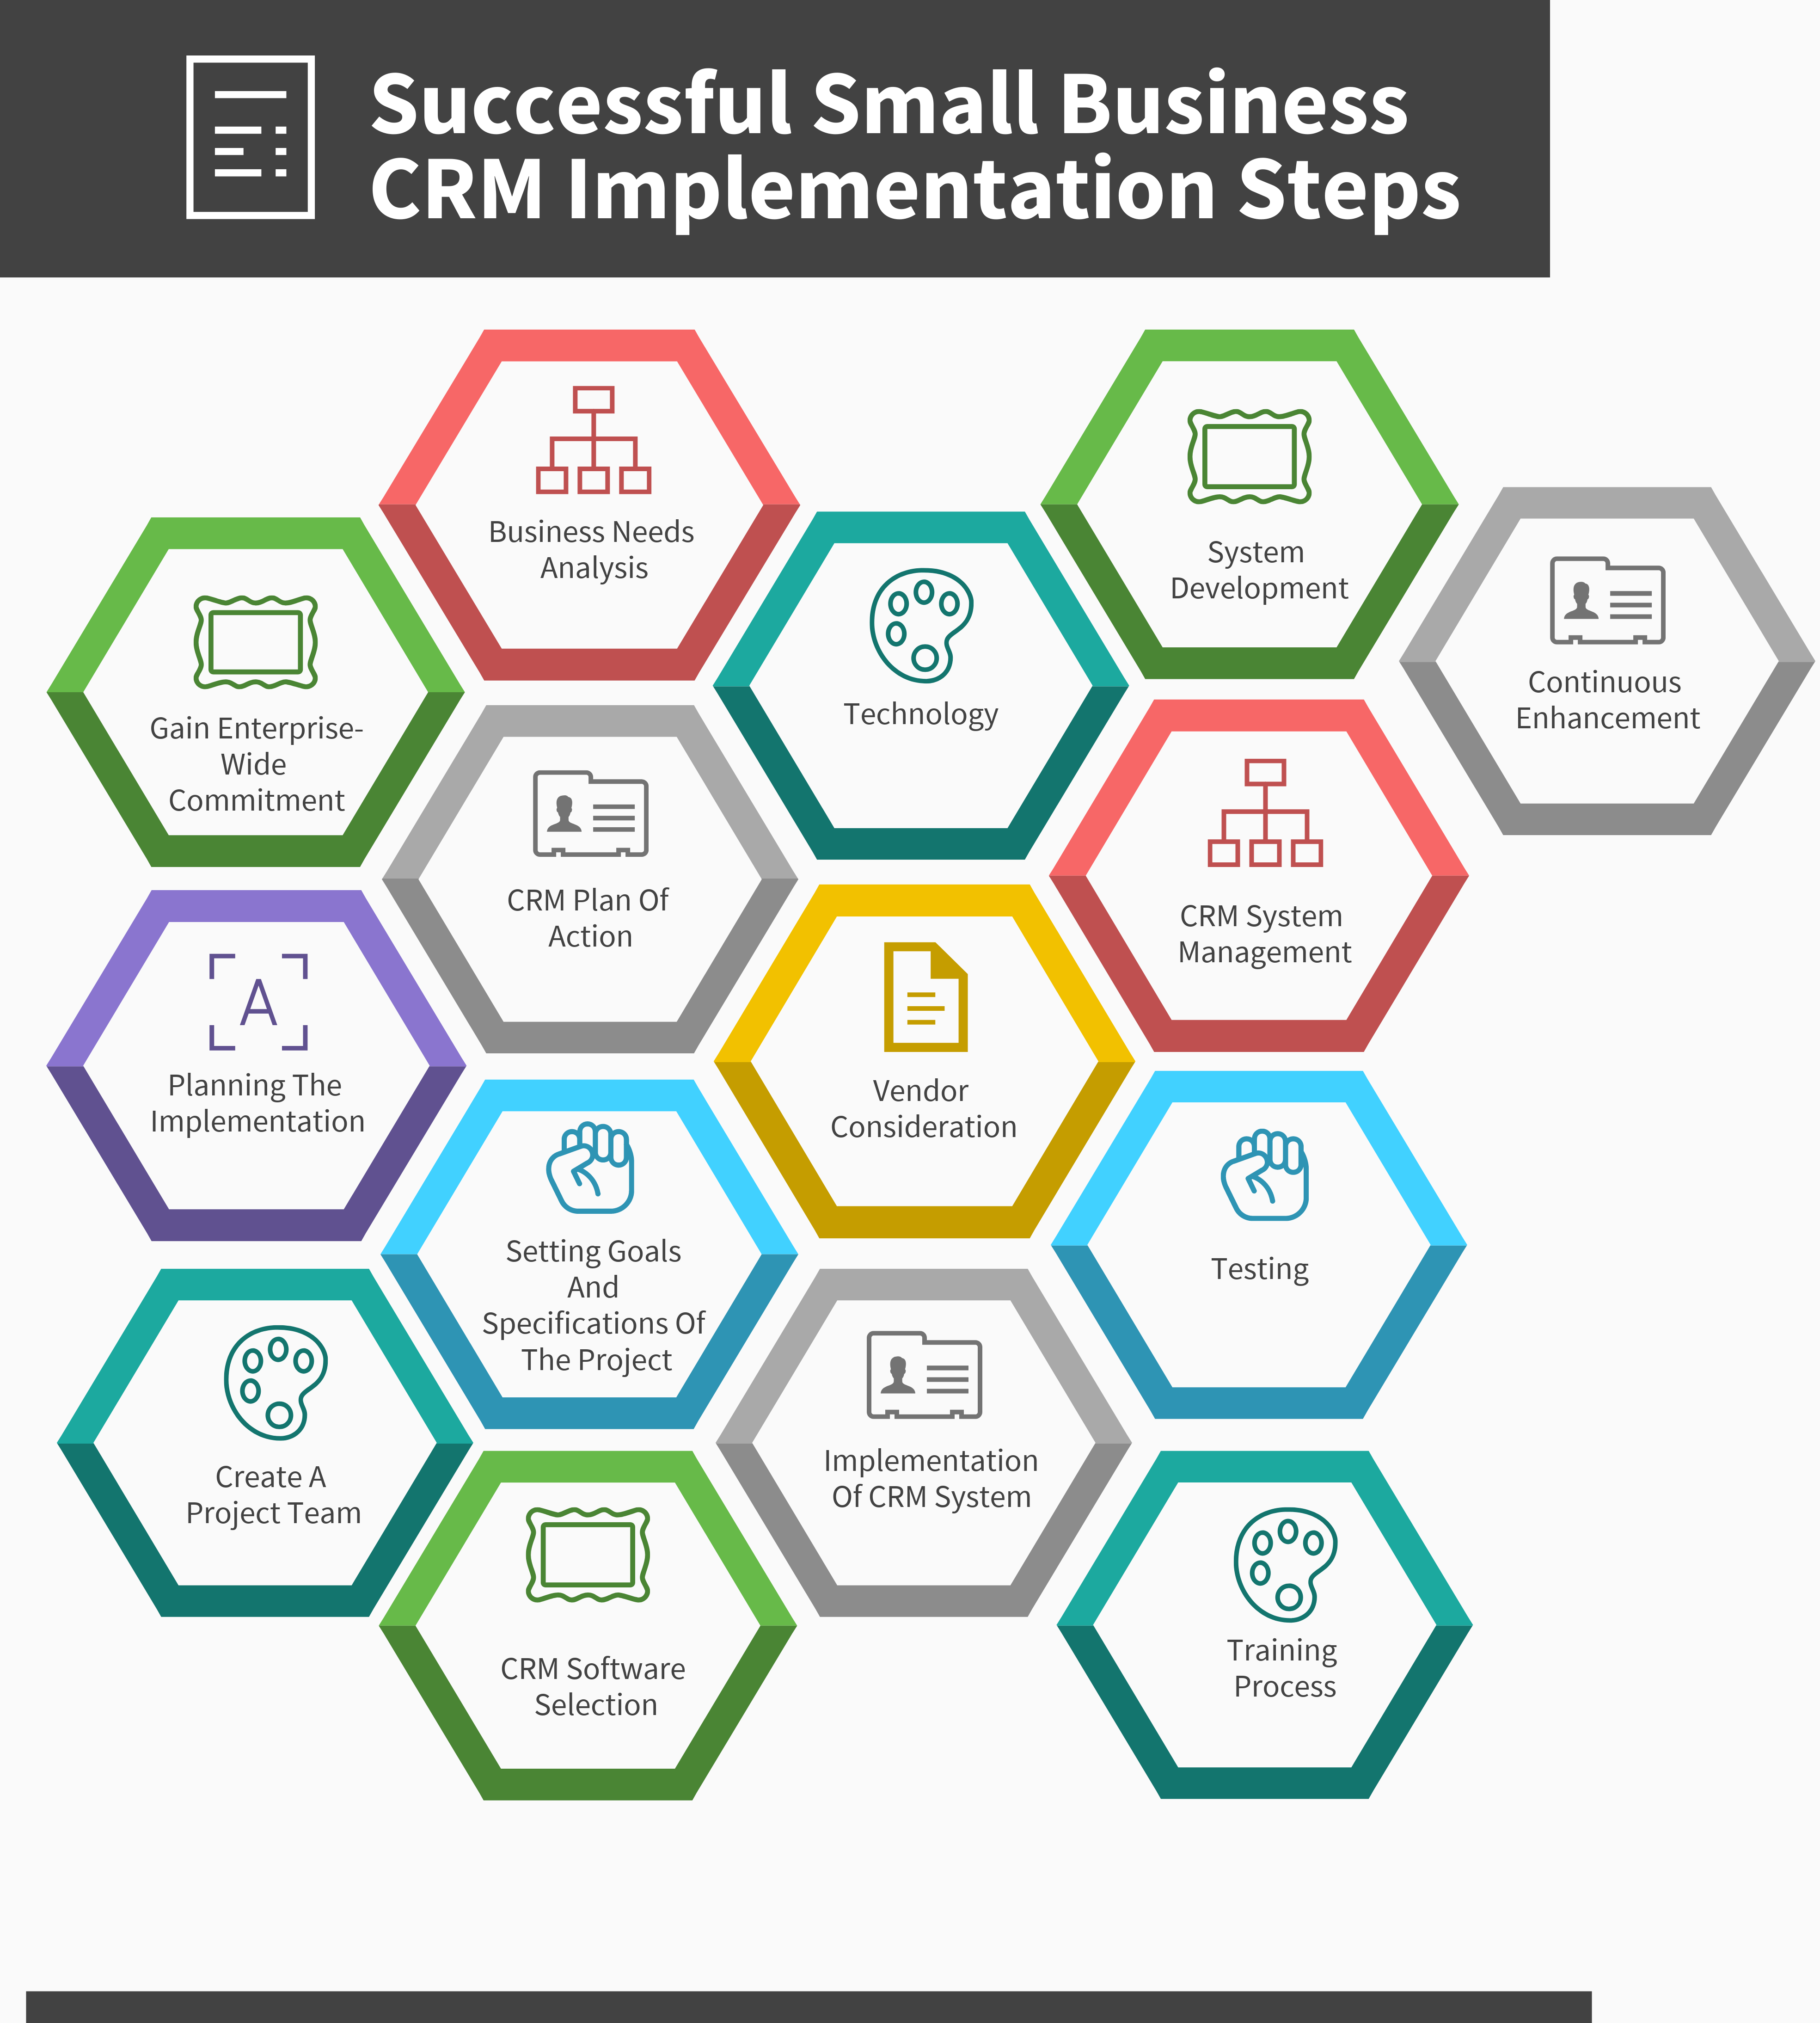 15 Steps for a Successful Small Business CRM Implementation in 2022